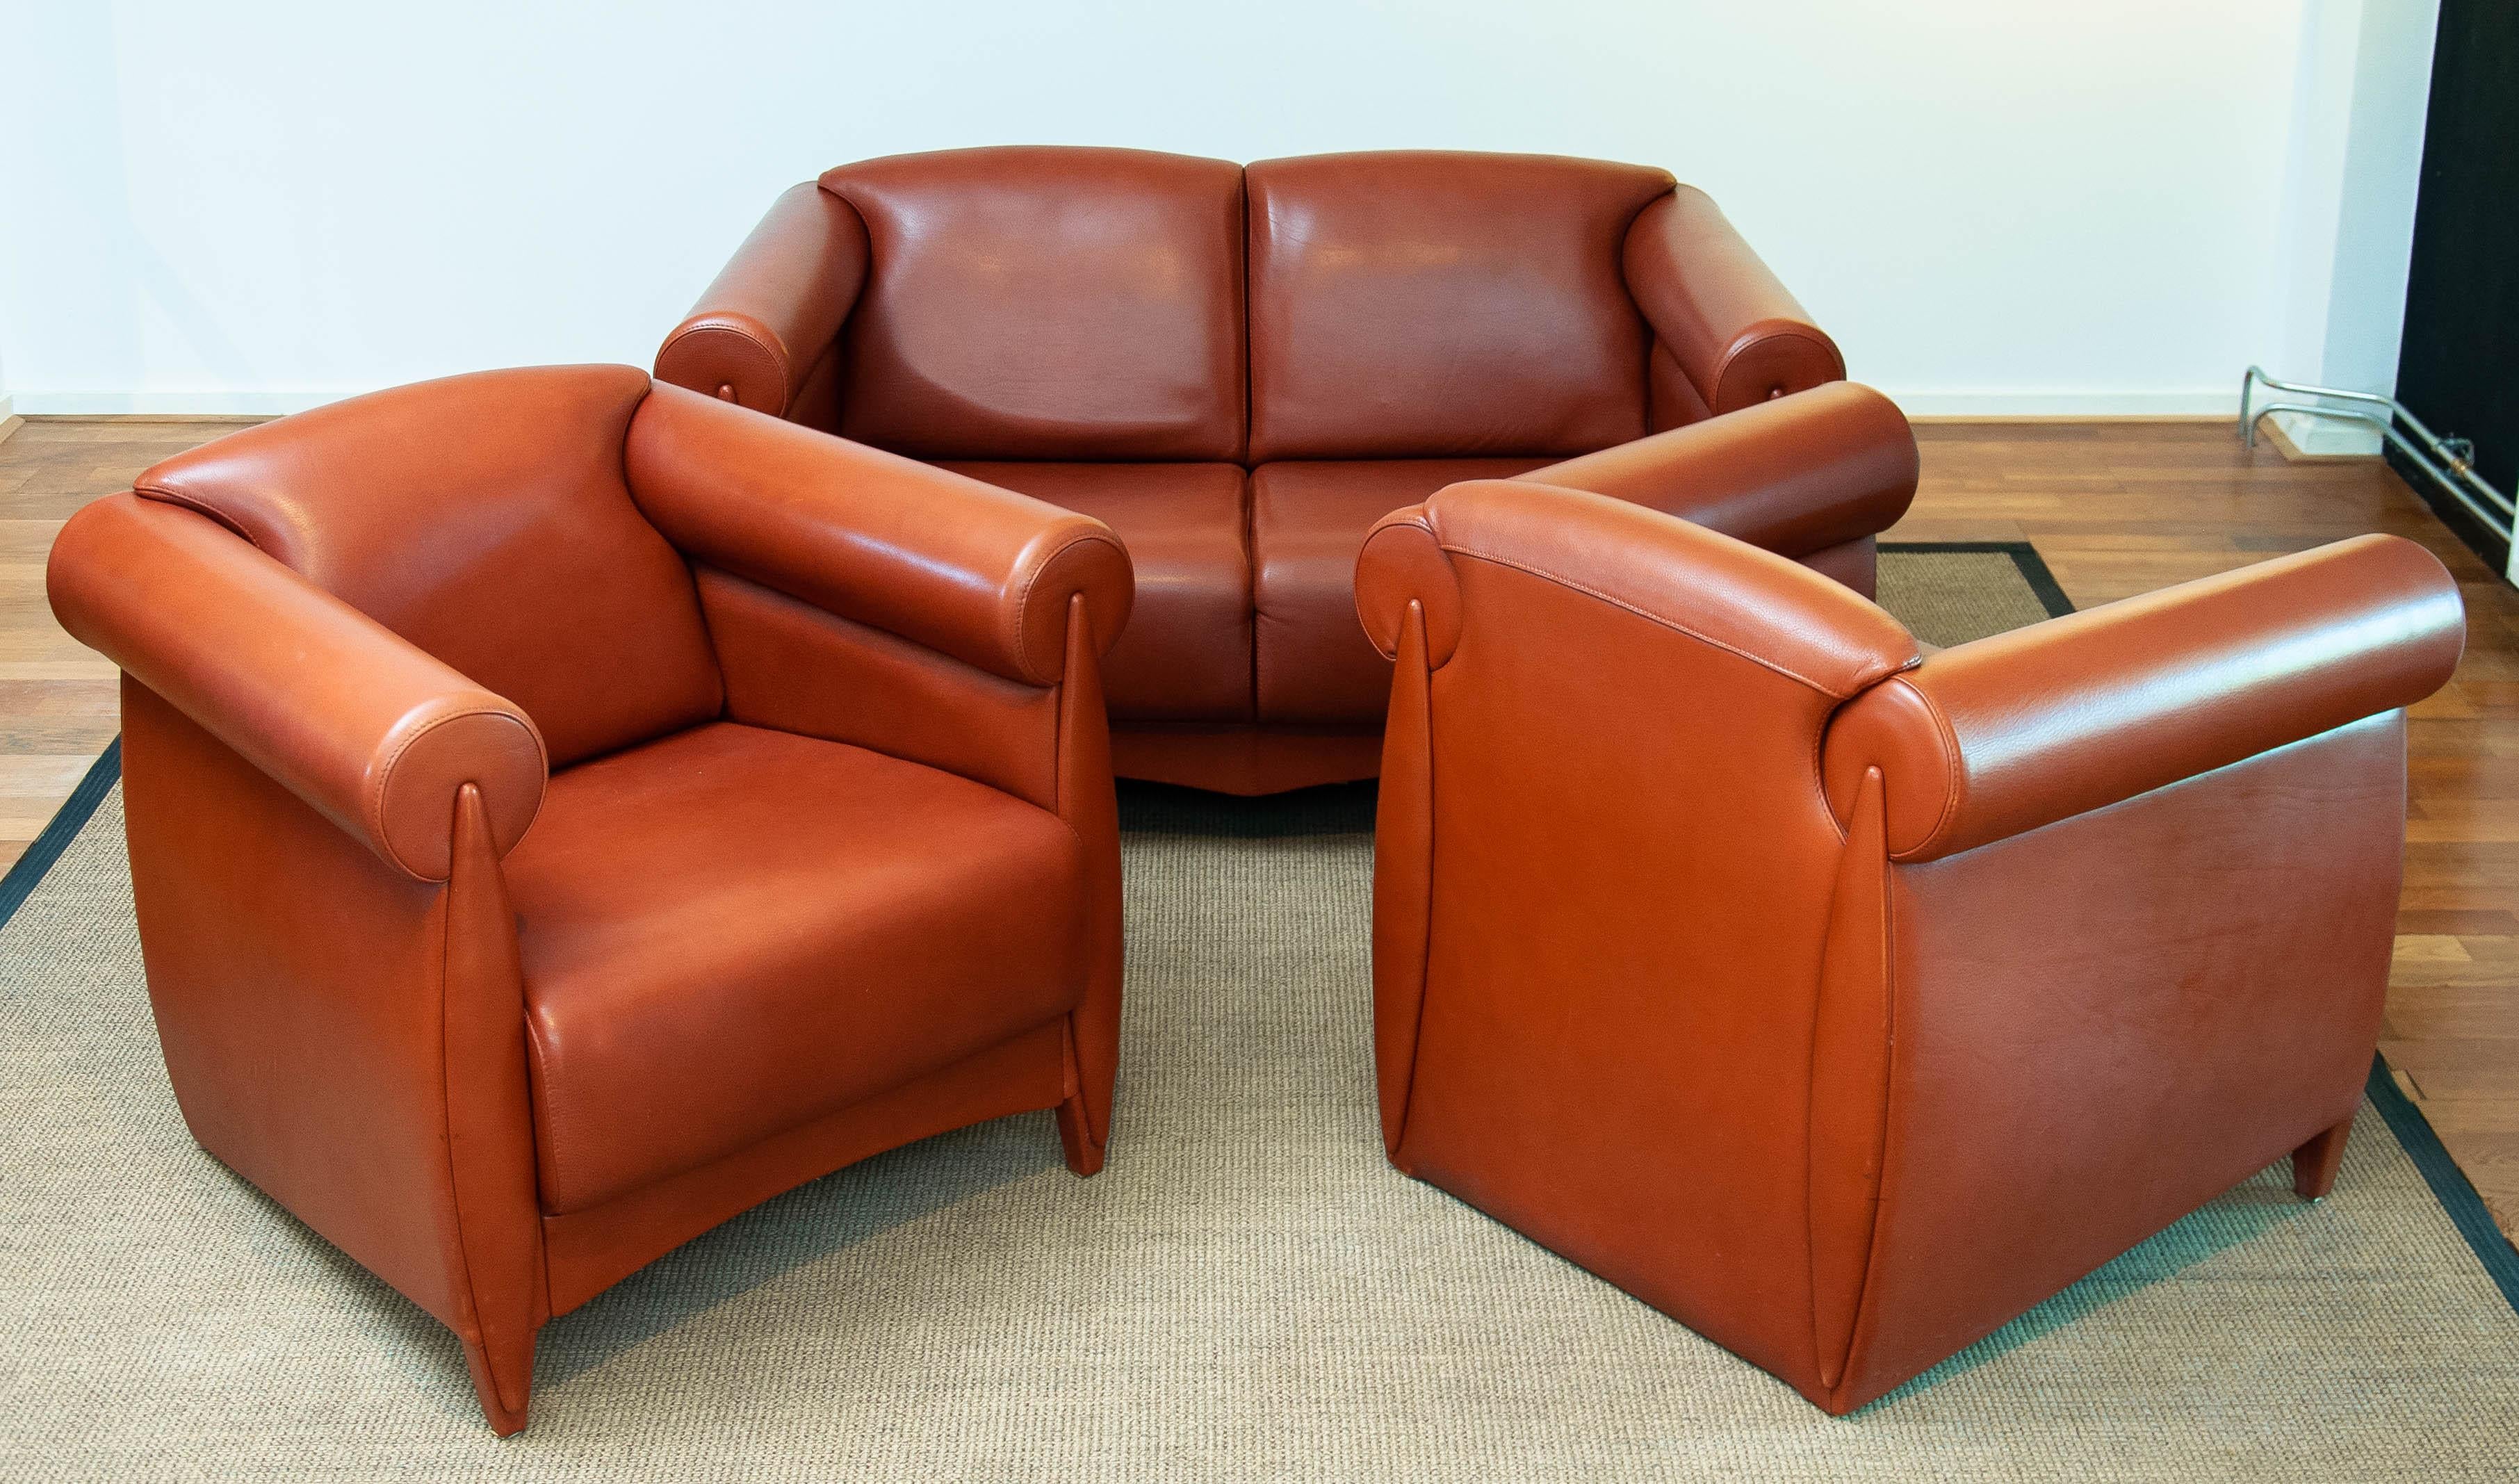 '80 Modern Art Deco Seating Group in Cognac Leather by Klaus Wettergren Denmark  For Sale 1